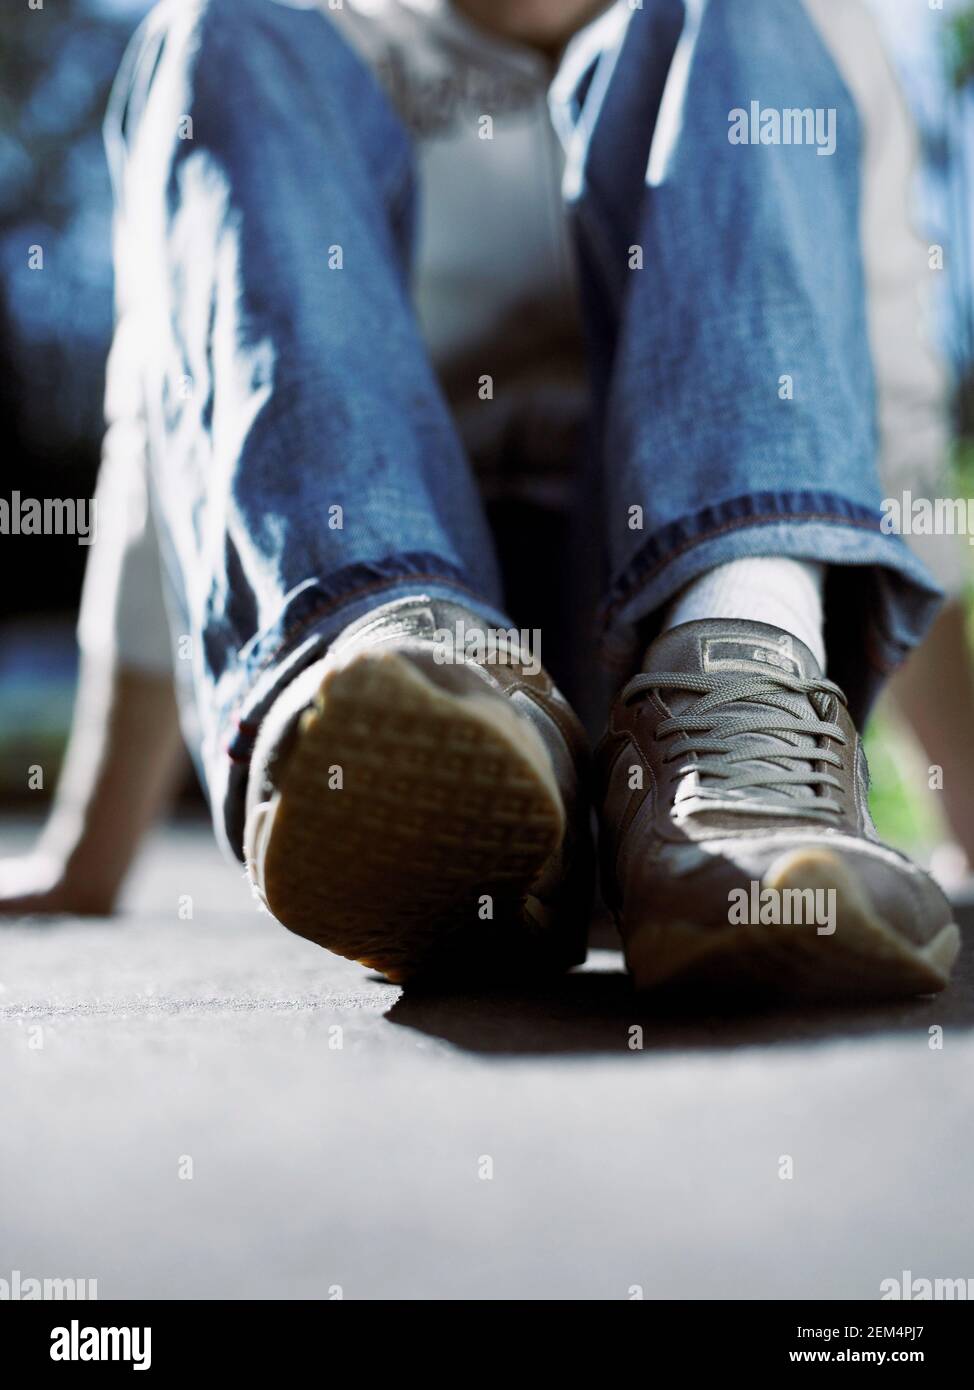 Low section view of a person wearing sports shoes Stock Photo